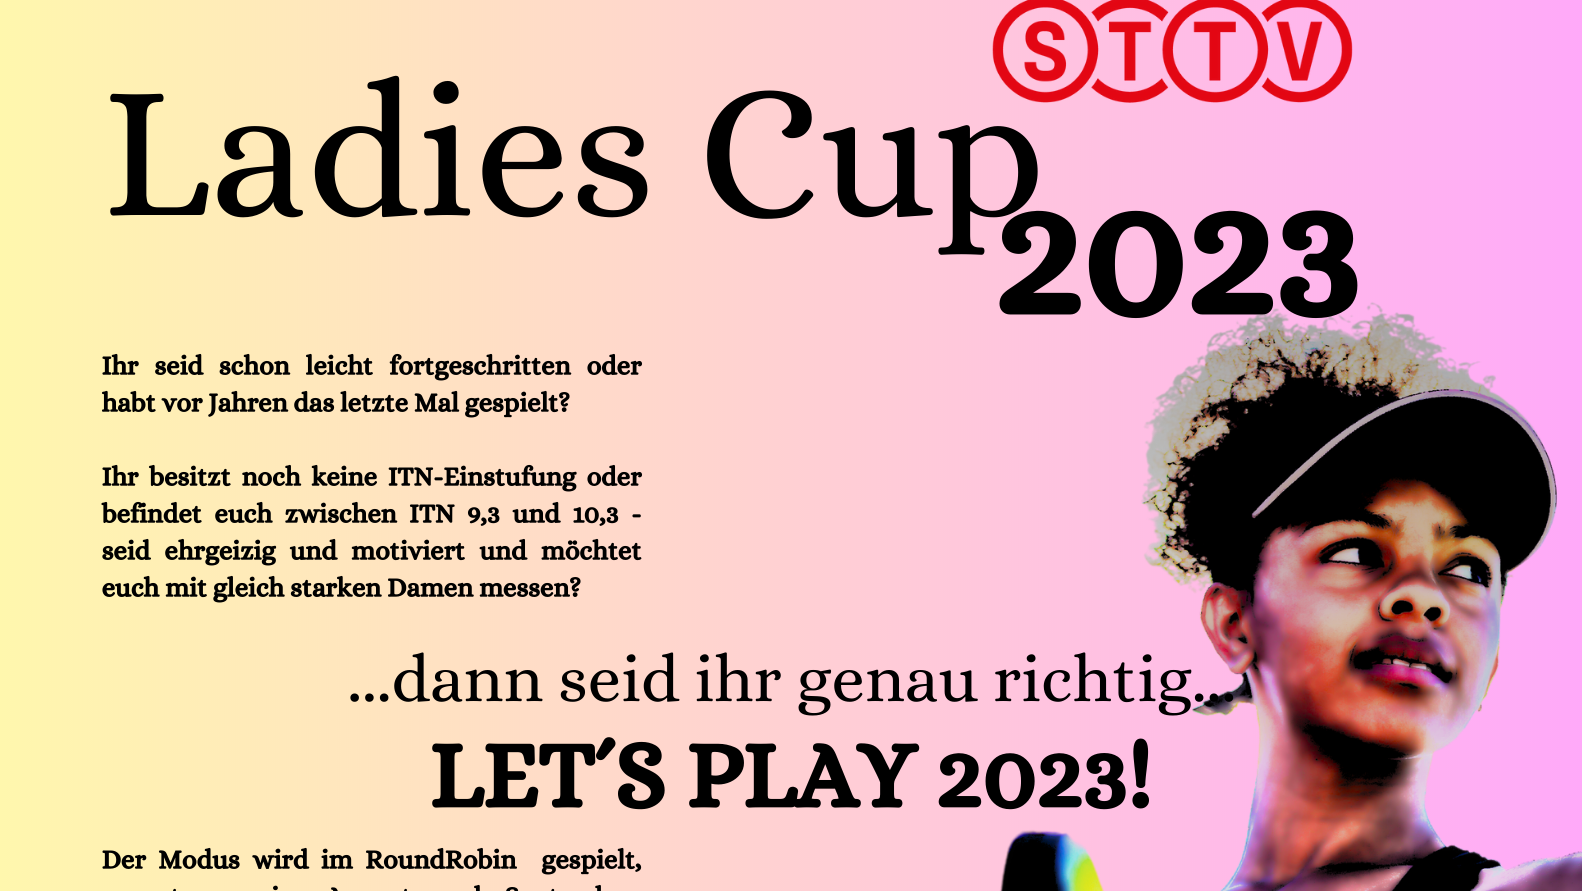 STTV Ladies Cup 2023